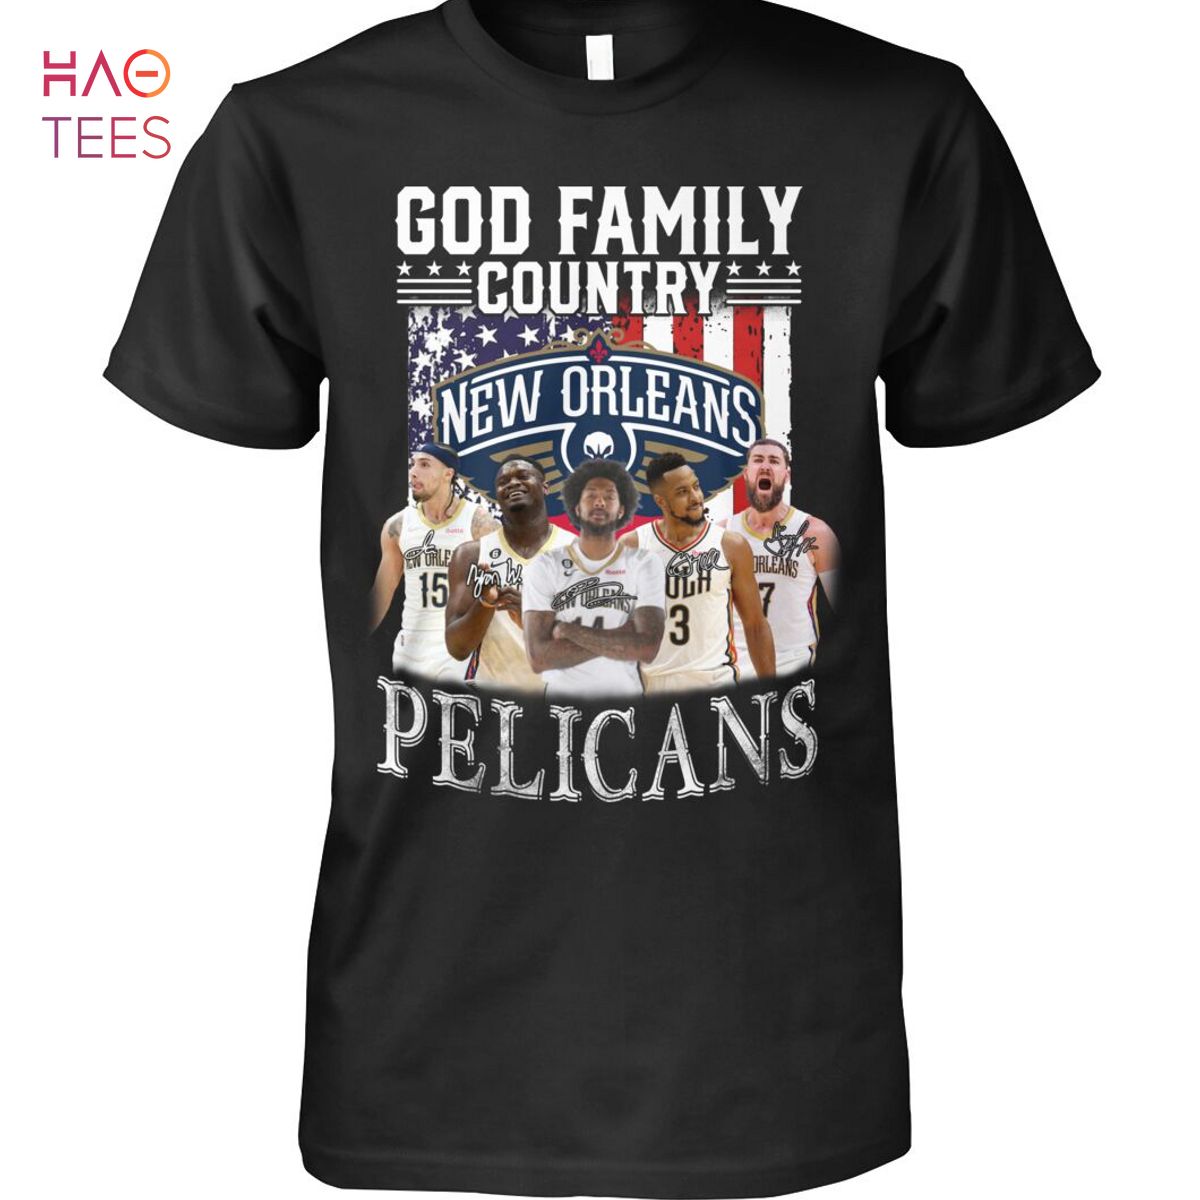 New Orleans Pelicans Shrit Limited Edition